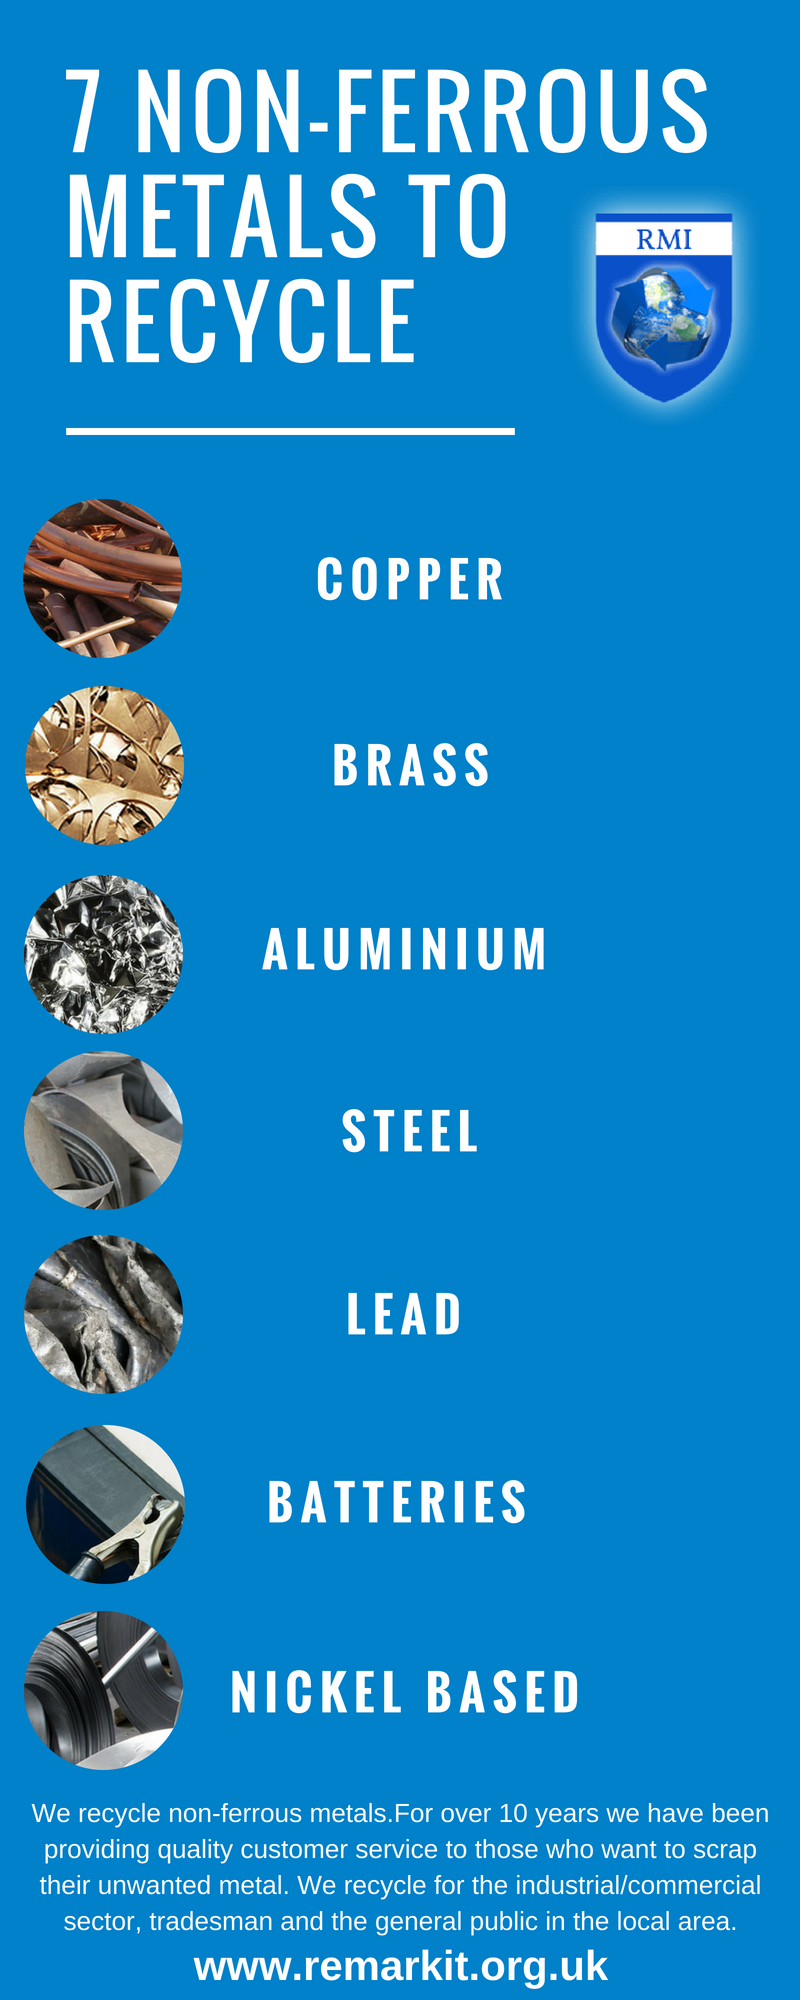 7 Non-Ferrous Metals To Recycle